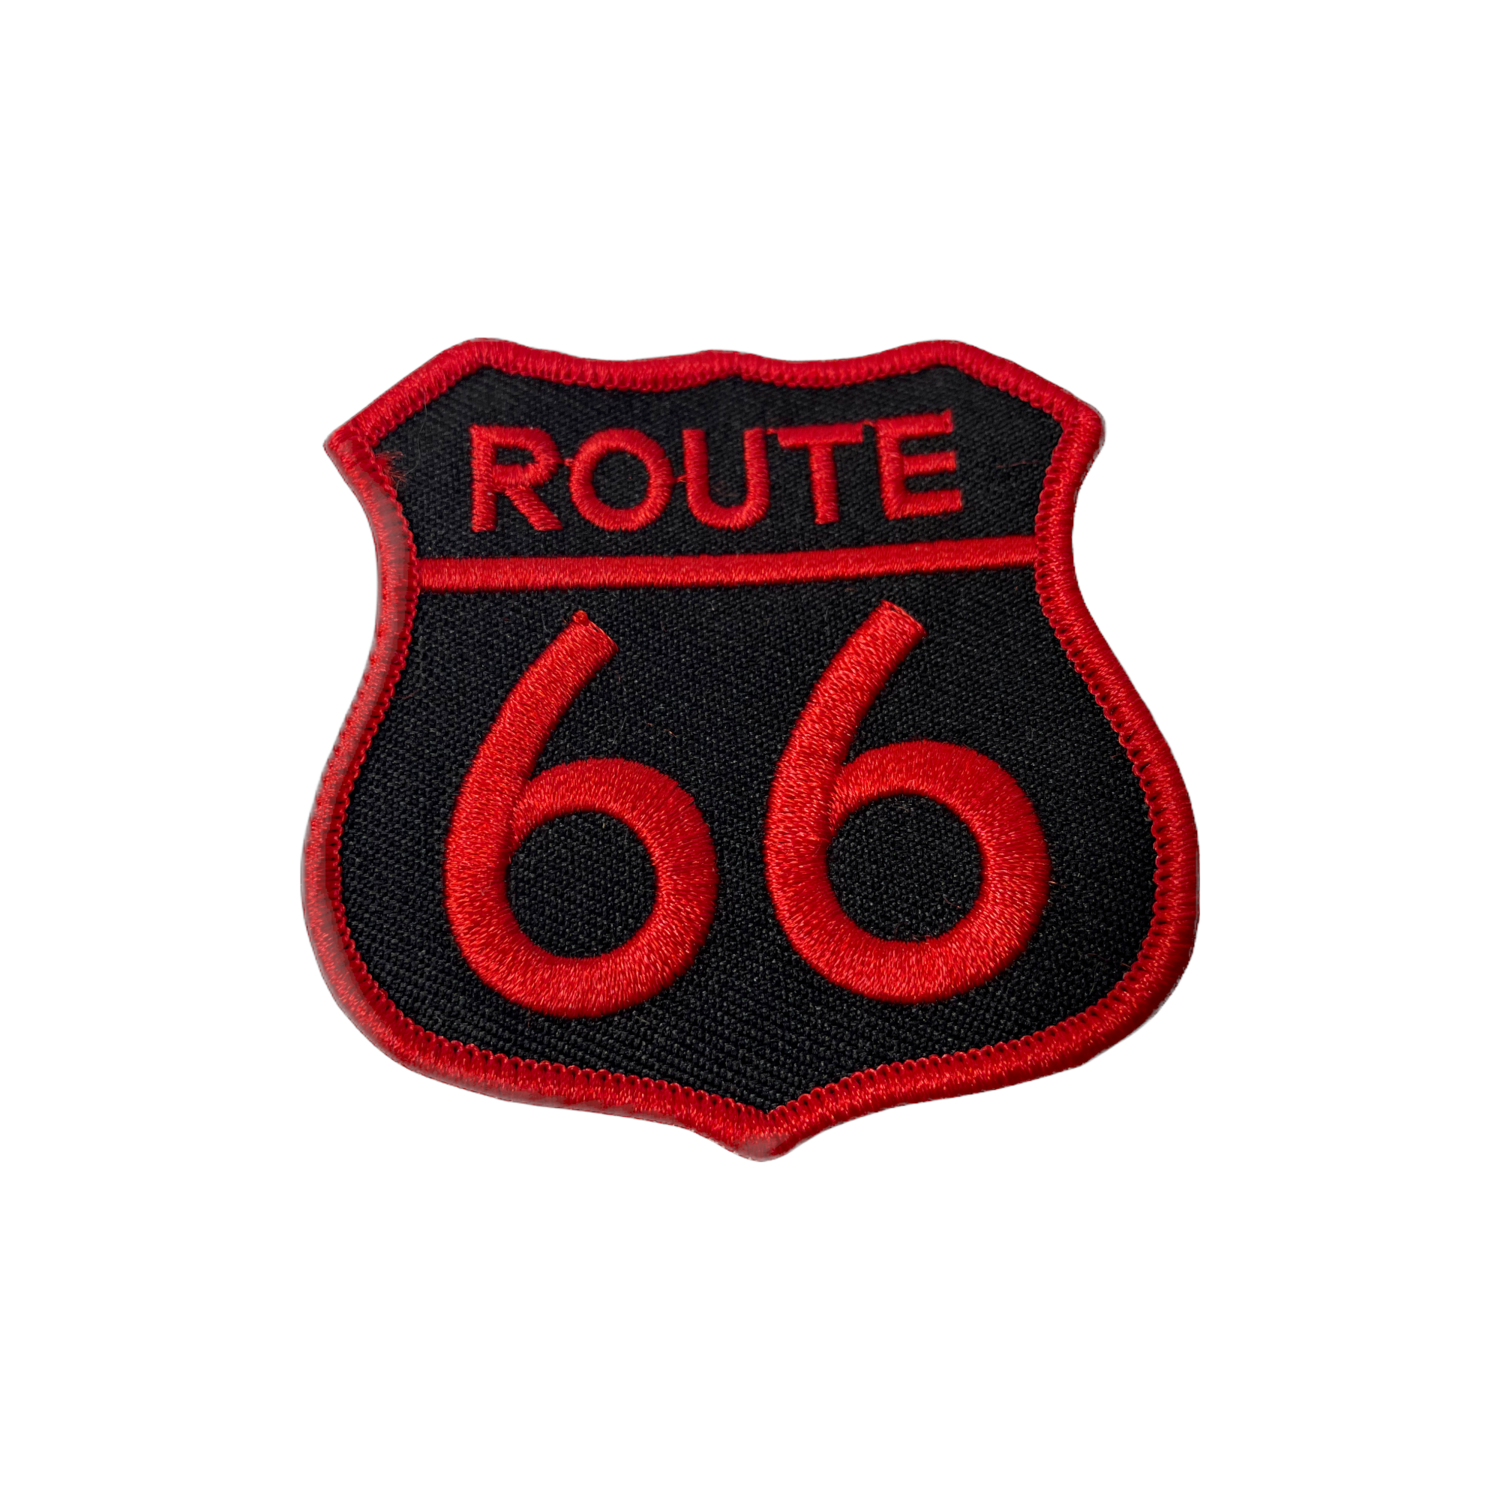 Red & Black Route 66 Patch